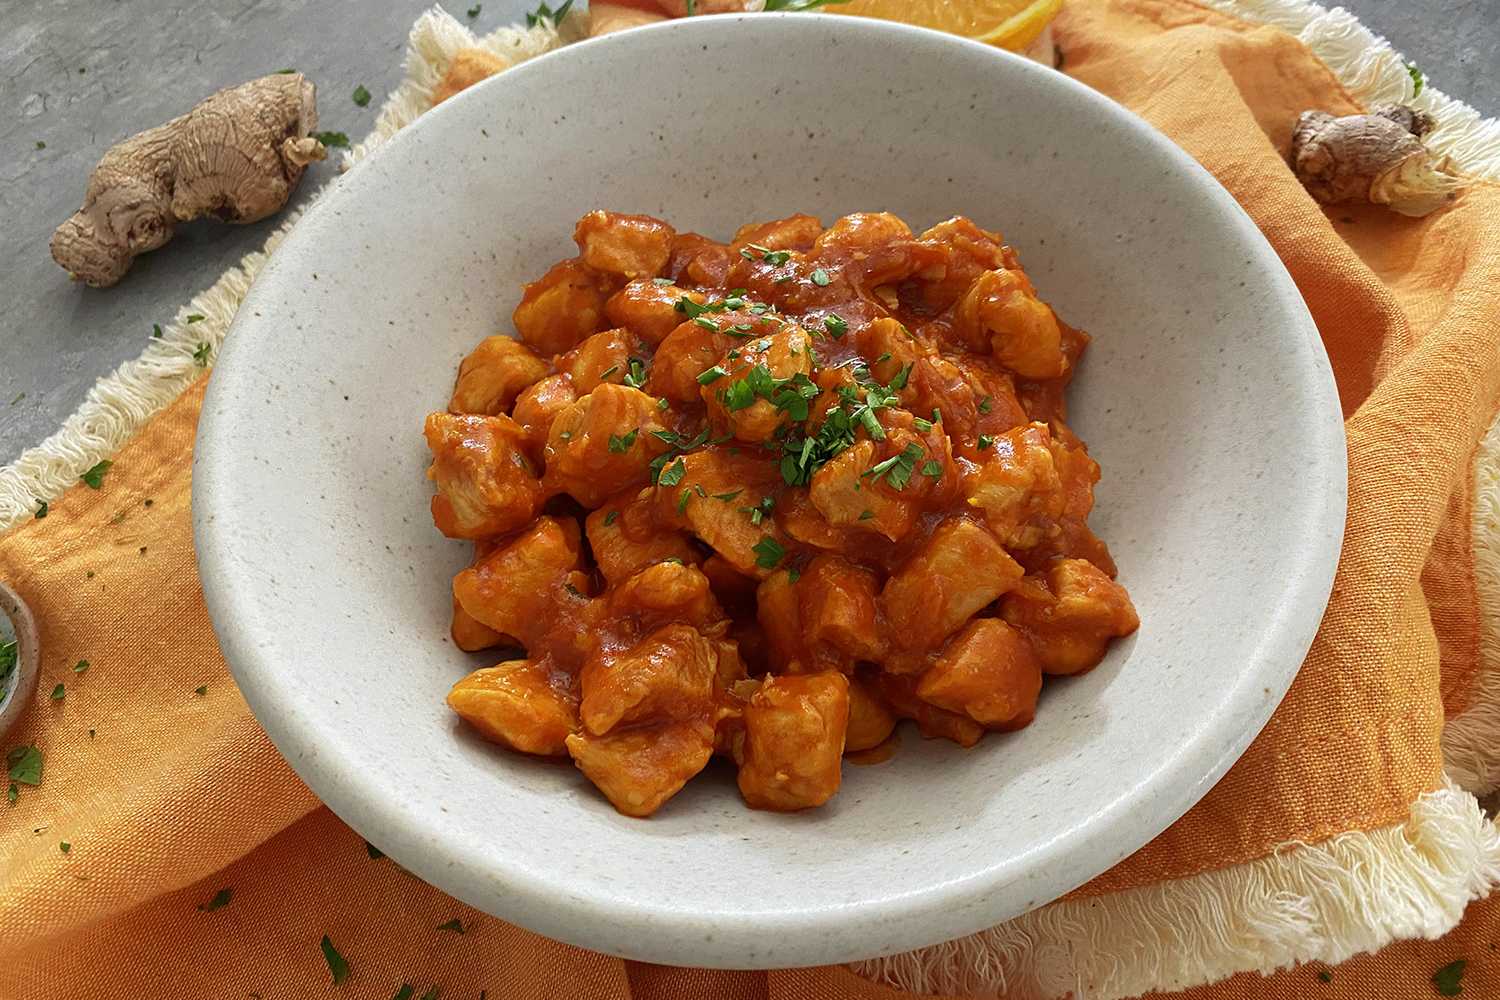 Chicken cubes in orange sauce topped with chopped parsley in a white bowl with ginger on side